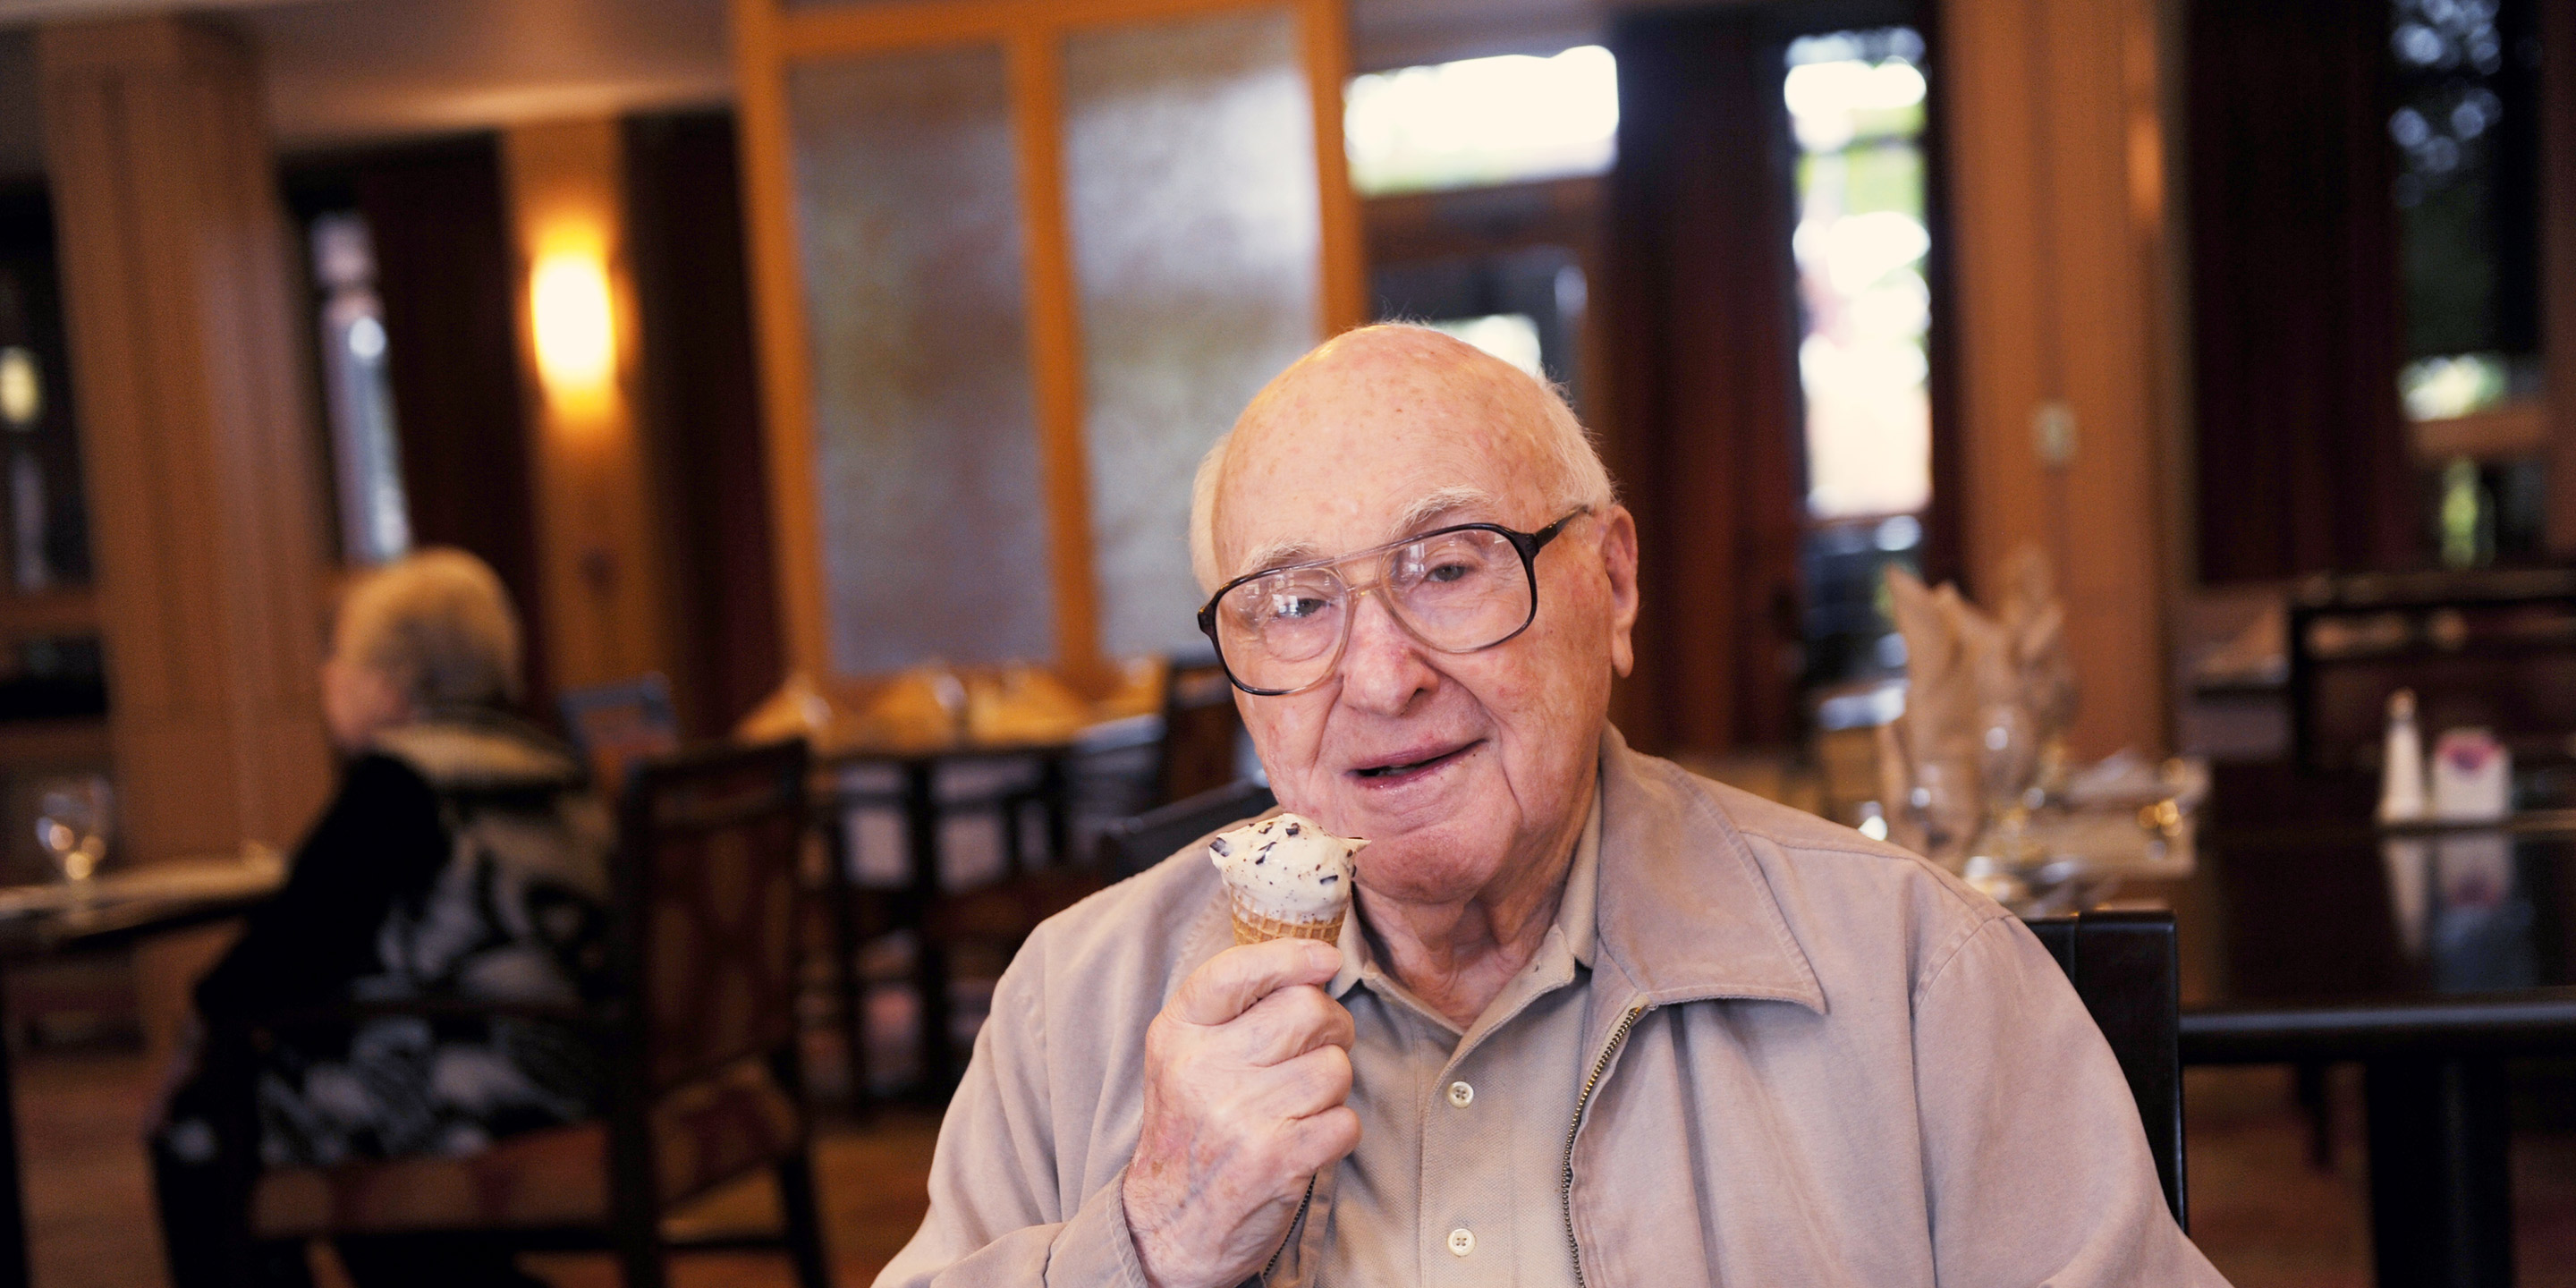 A man with glasses smiles while holding an ice cream cone in a dining room